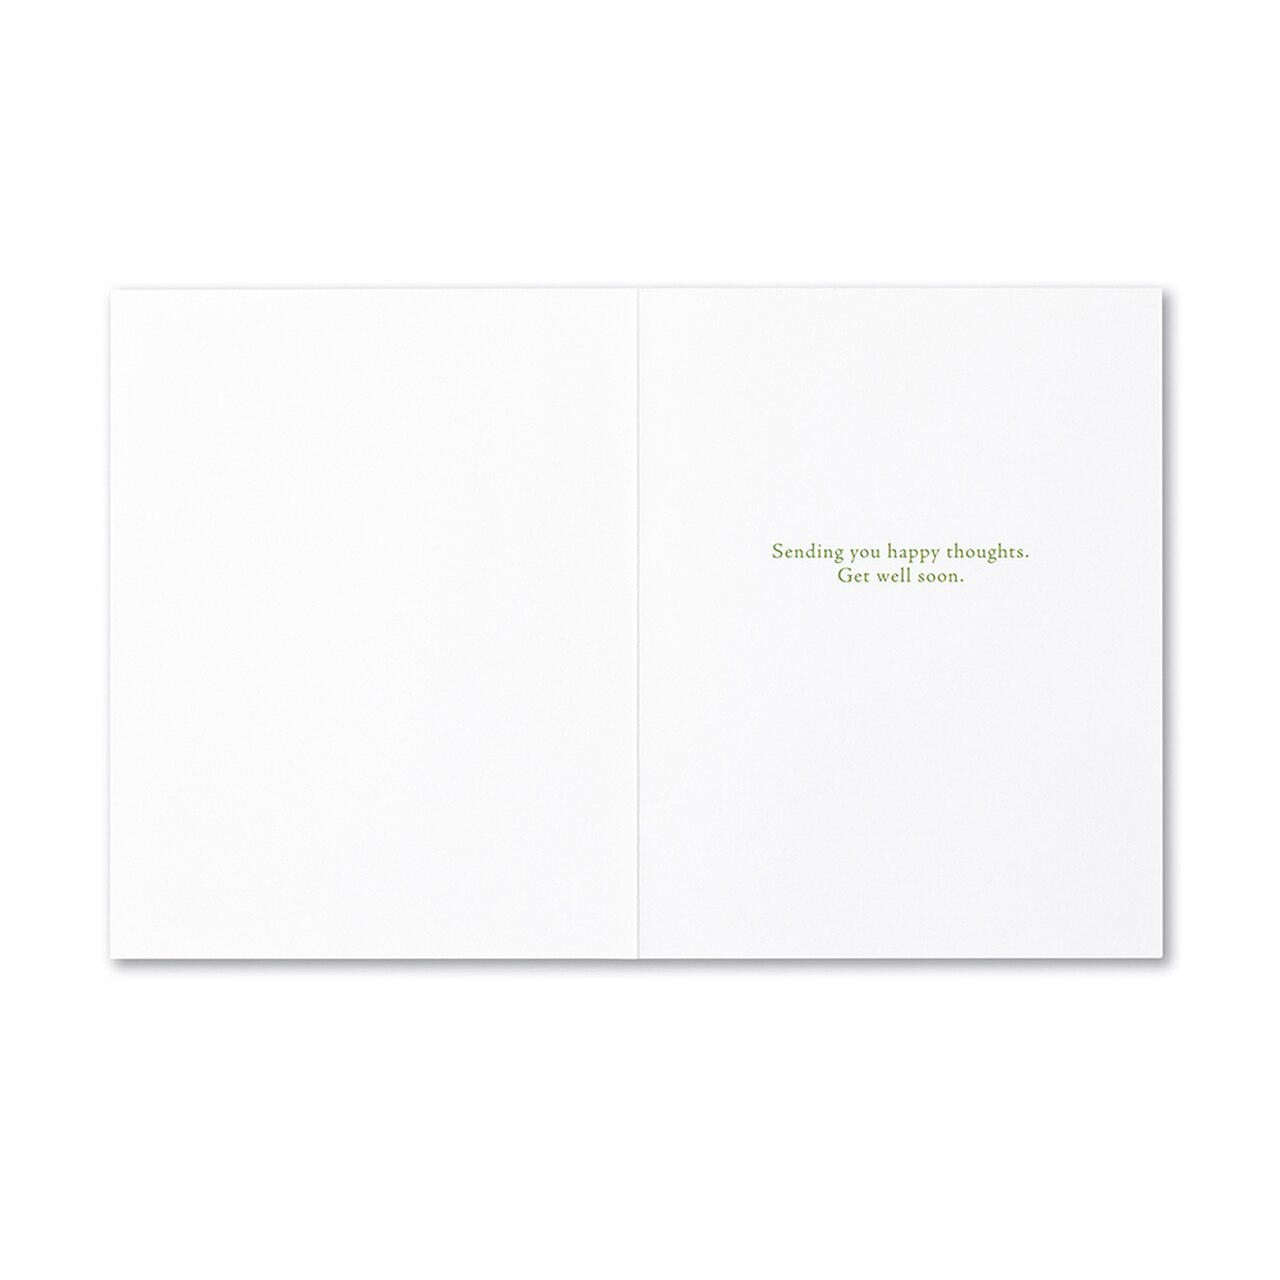 Positively Green Greeting Card - Get Well - "The best of healers is good cheer." by Pindar - Mellow Monkey